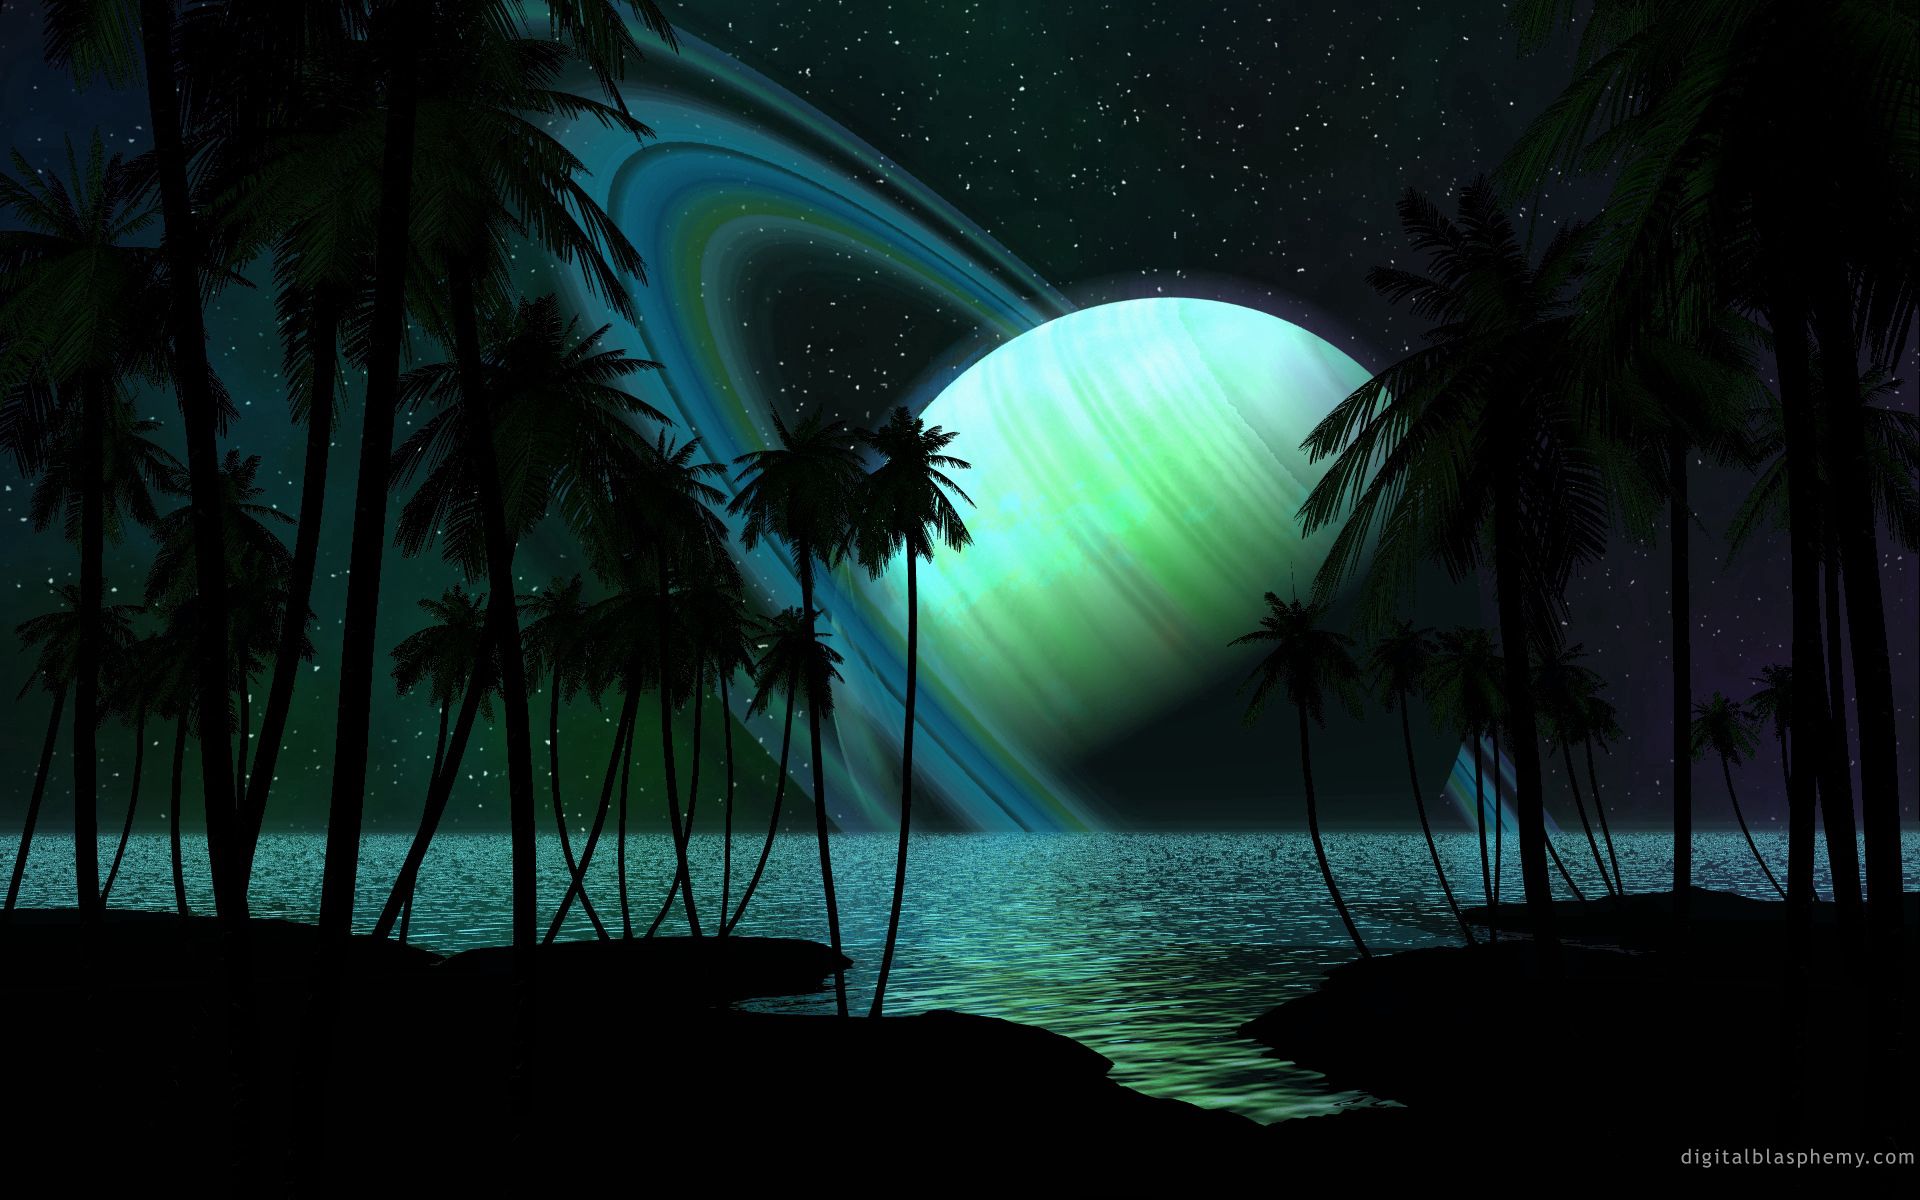 saturn, universe, water, palms, darkness, fiction, that's incredible